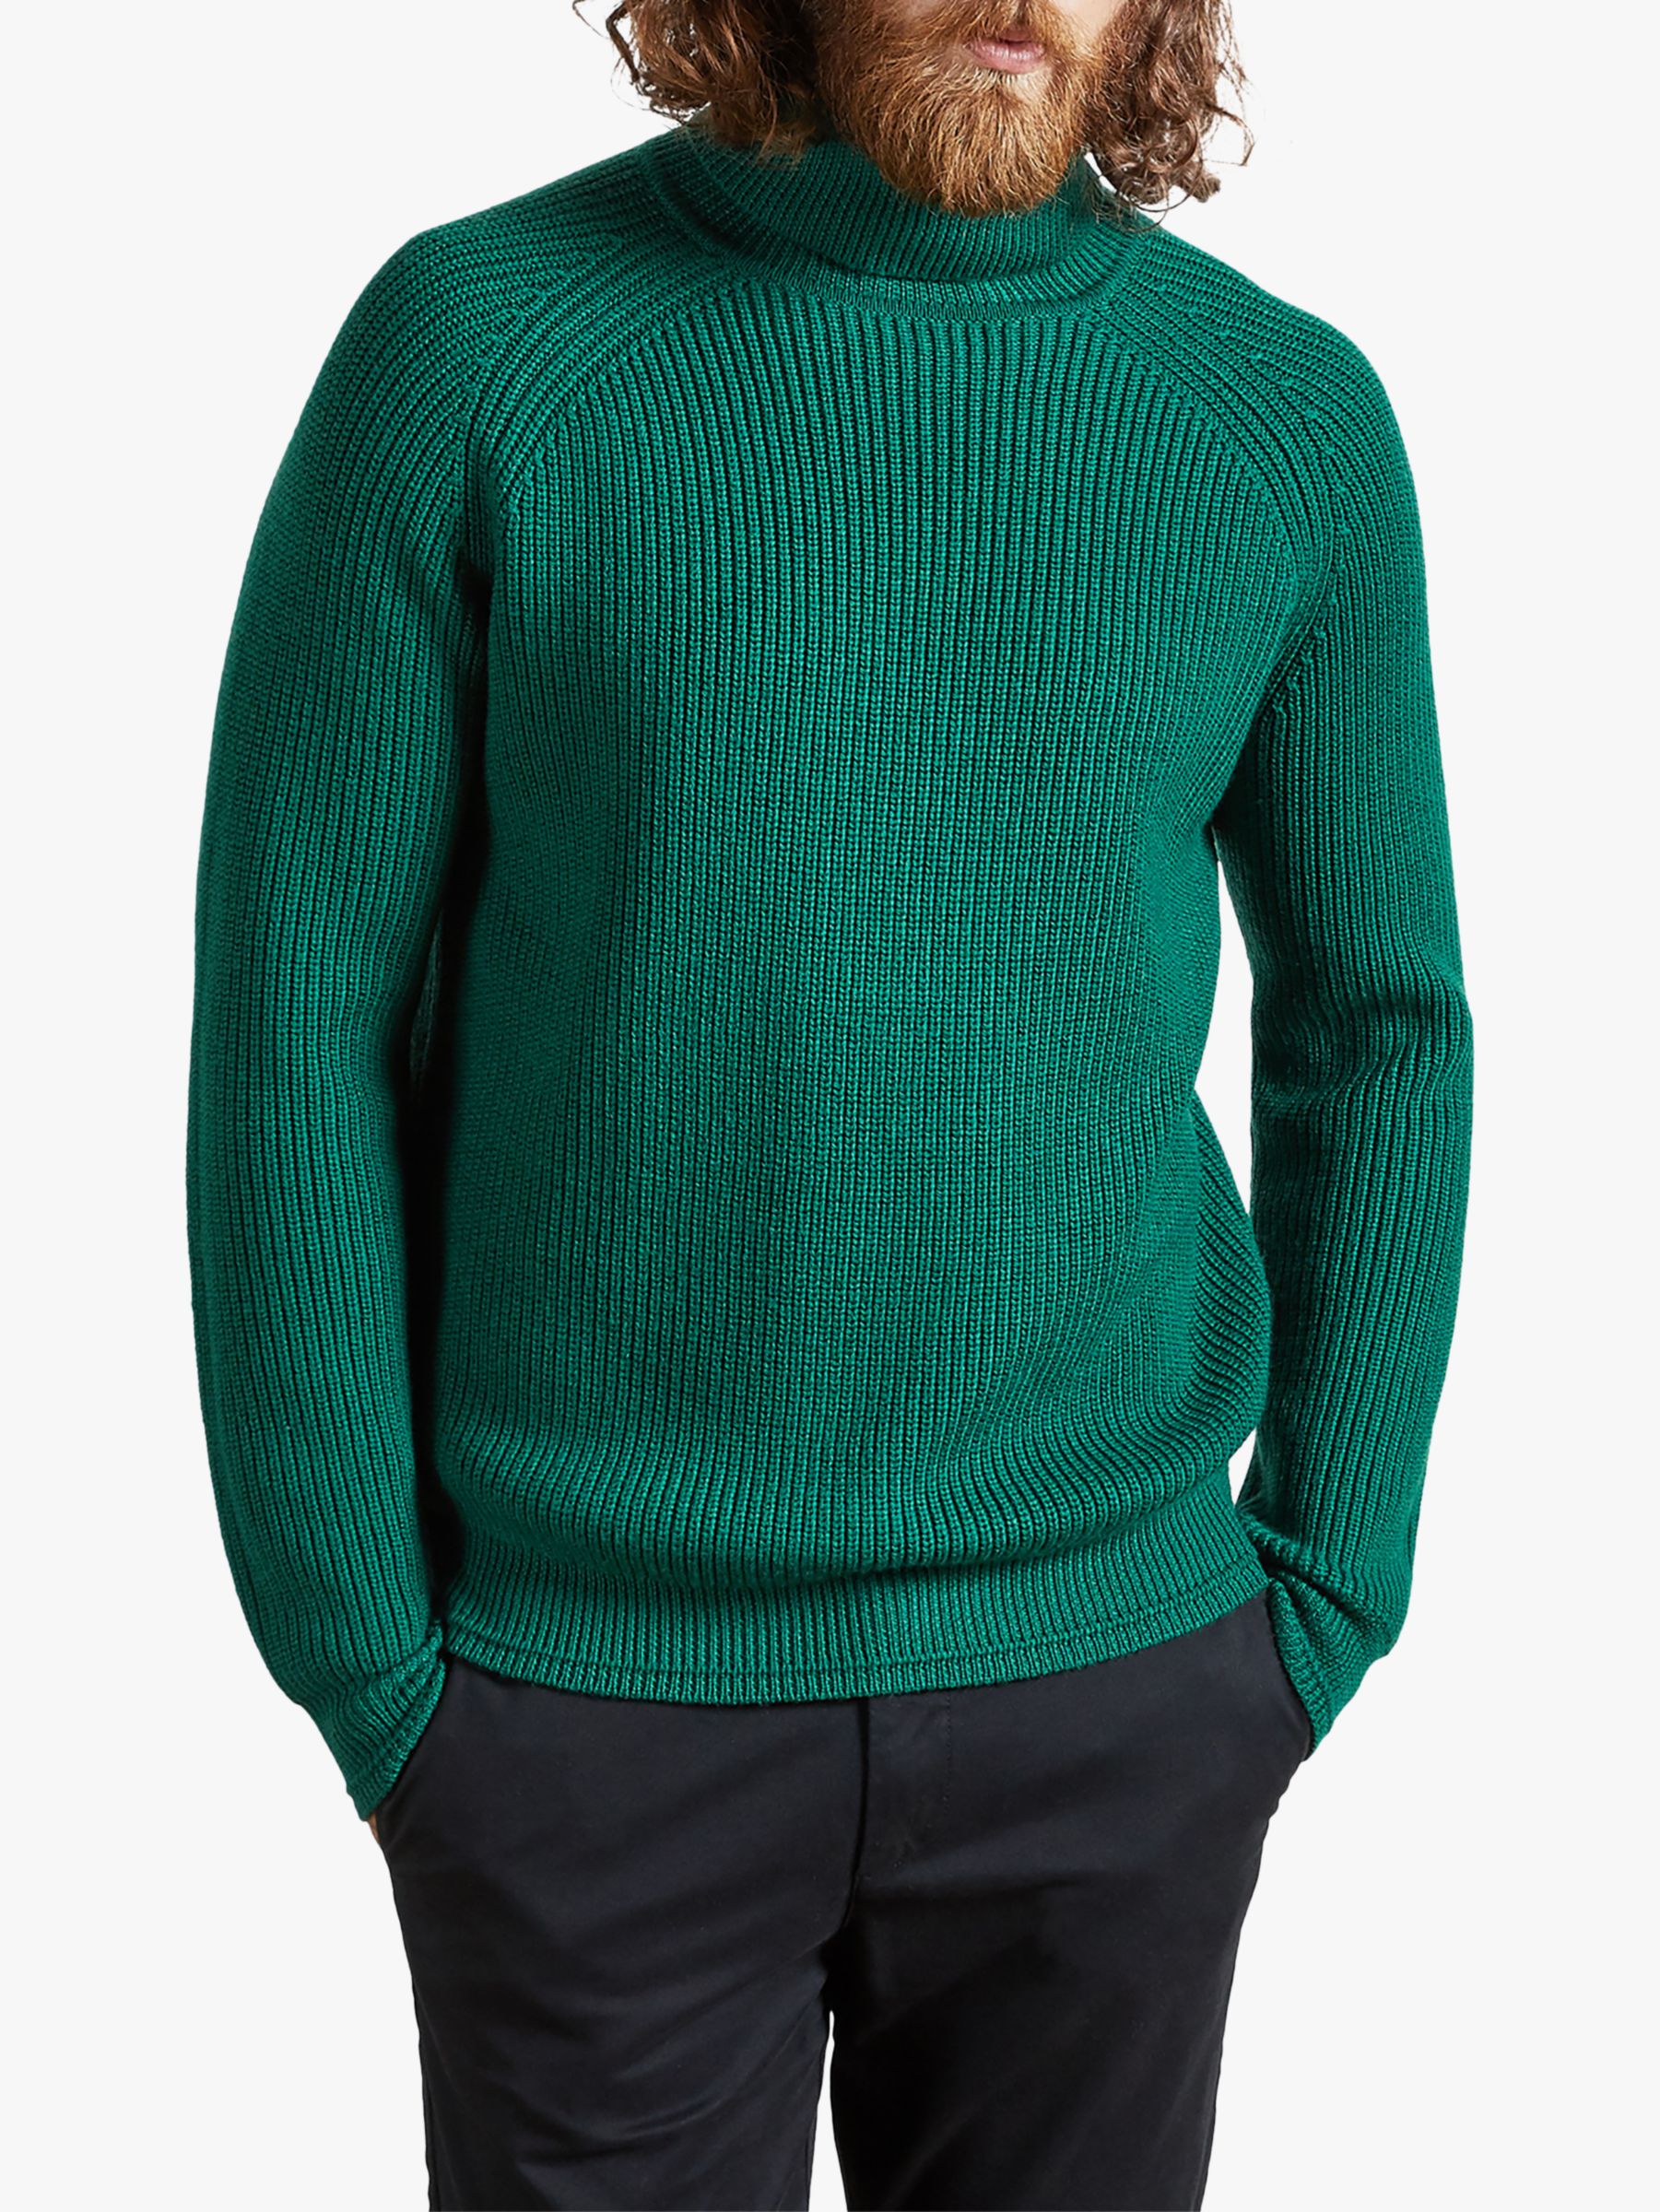 Ted Baker Noodles Chunky Roll Neck Knit Jumper at John Lewis & Partners